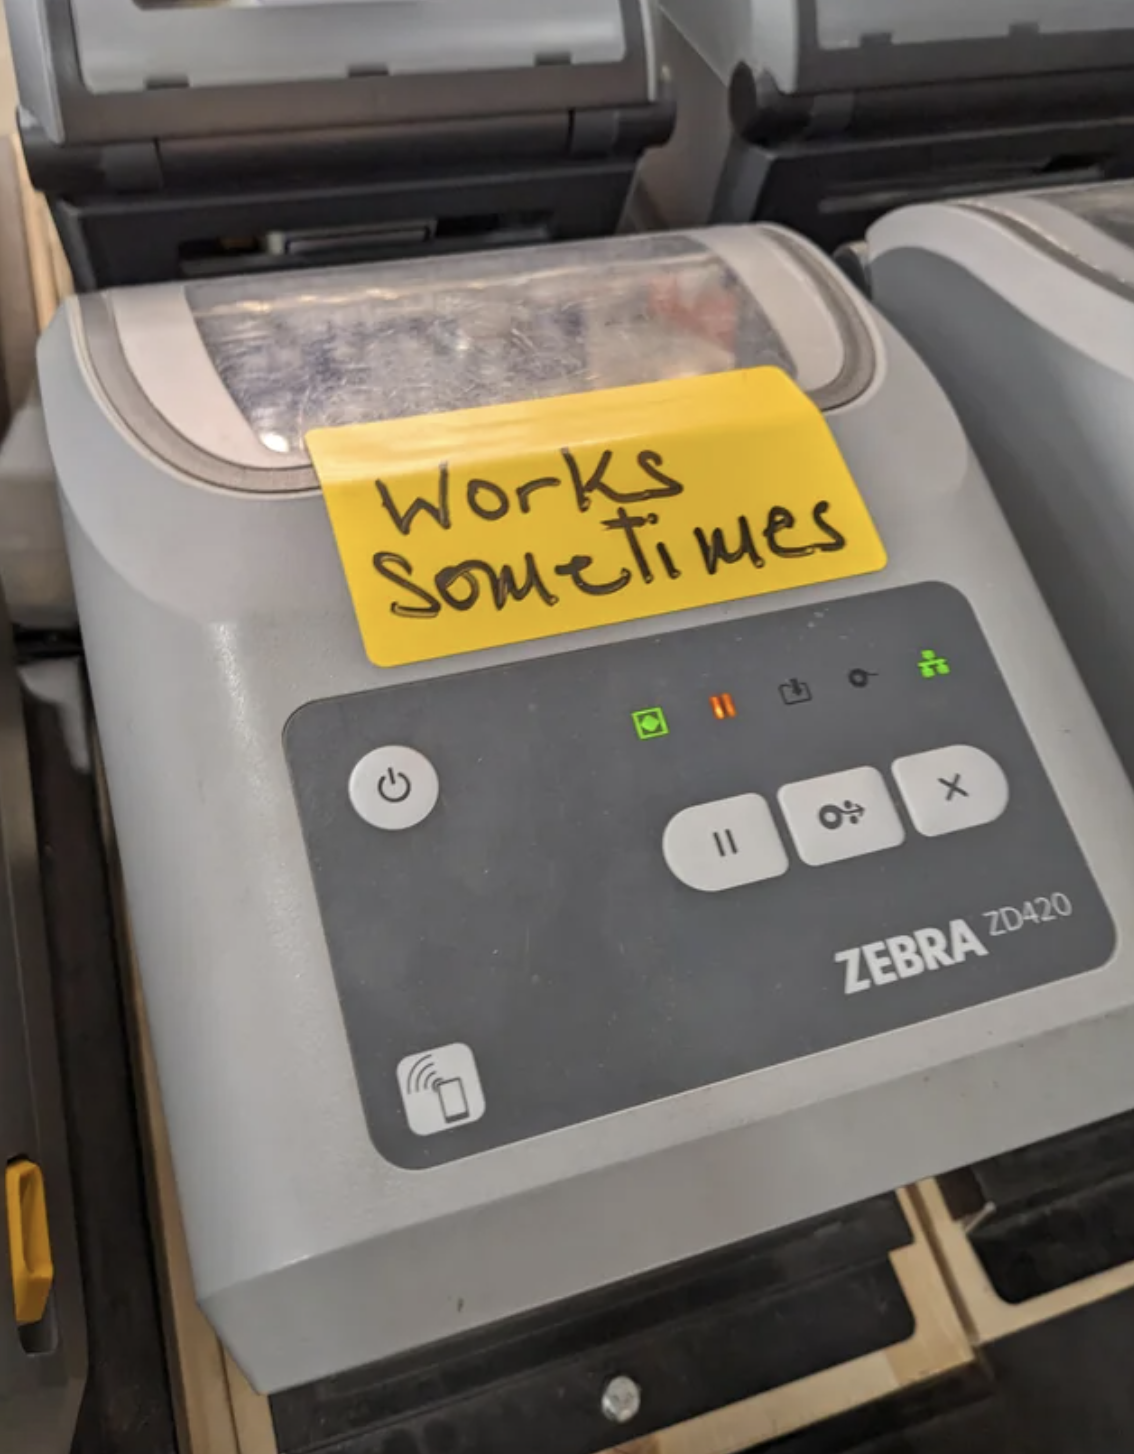 the note left on a machine